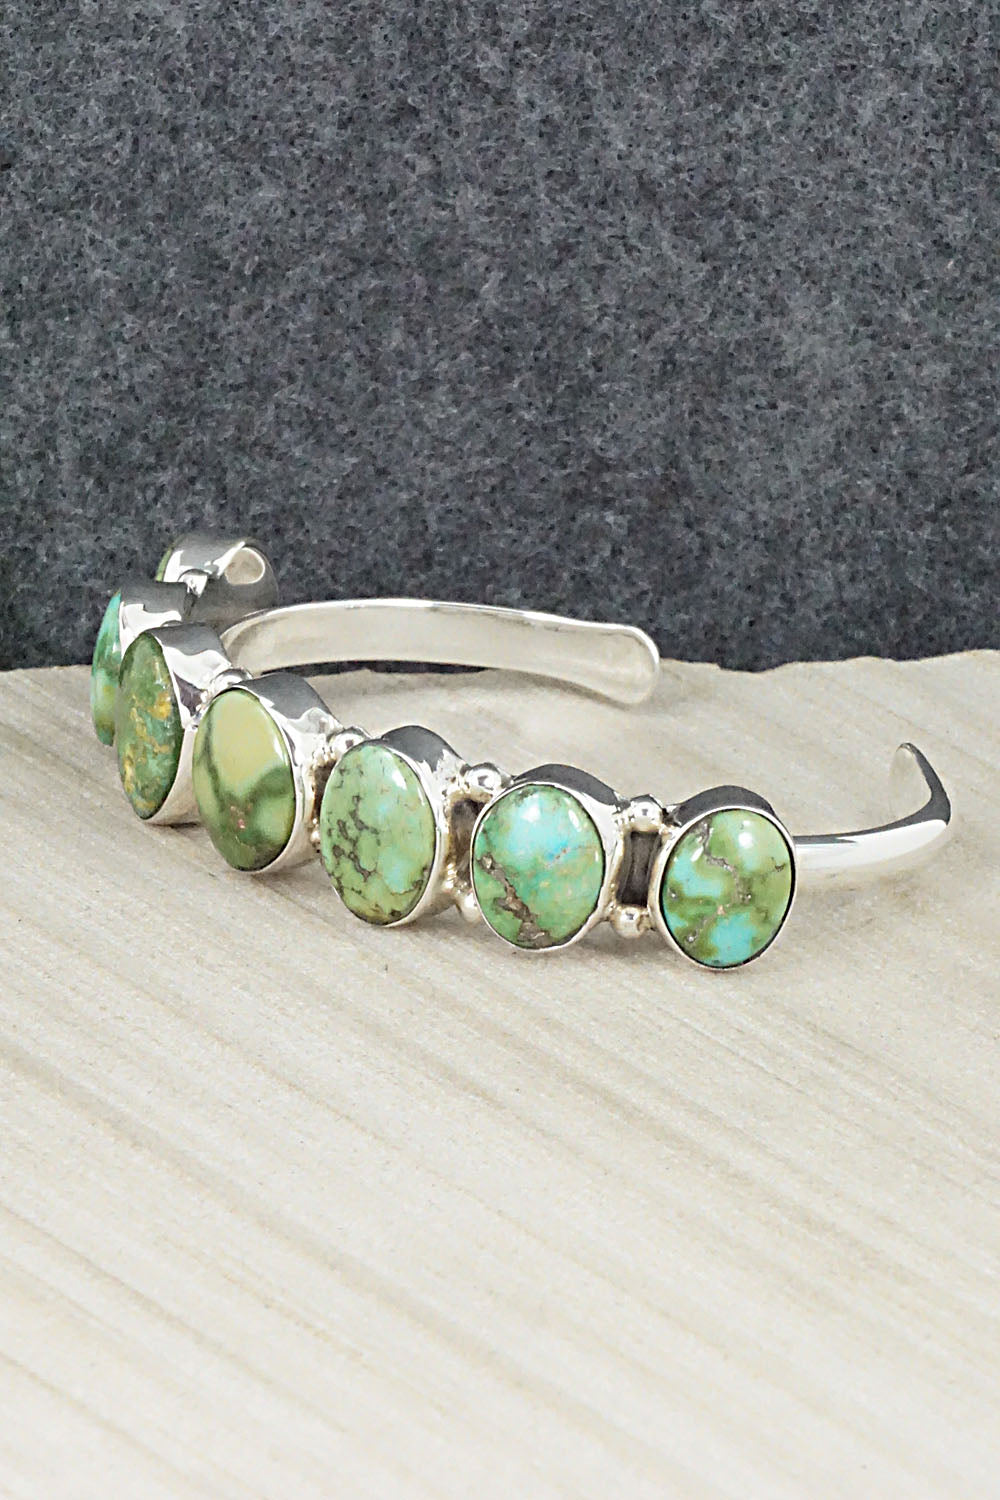 Turquoise & Sterling Silver Bracelet - Thomas Yazzie